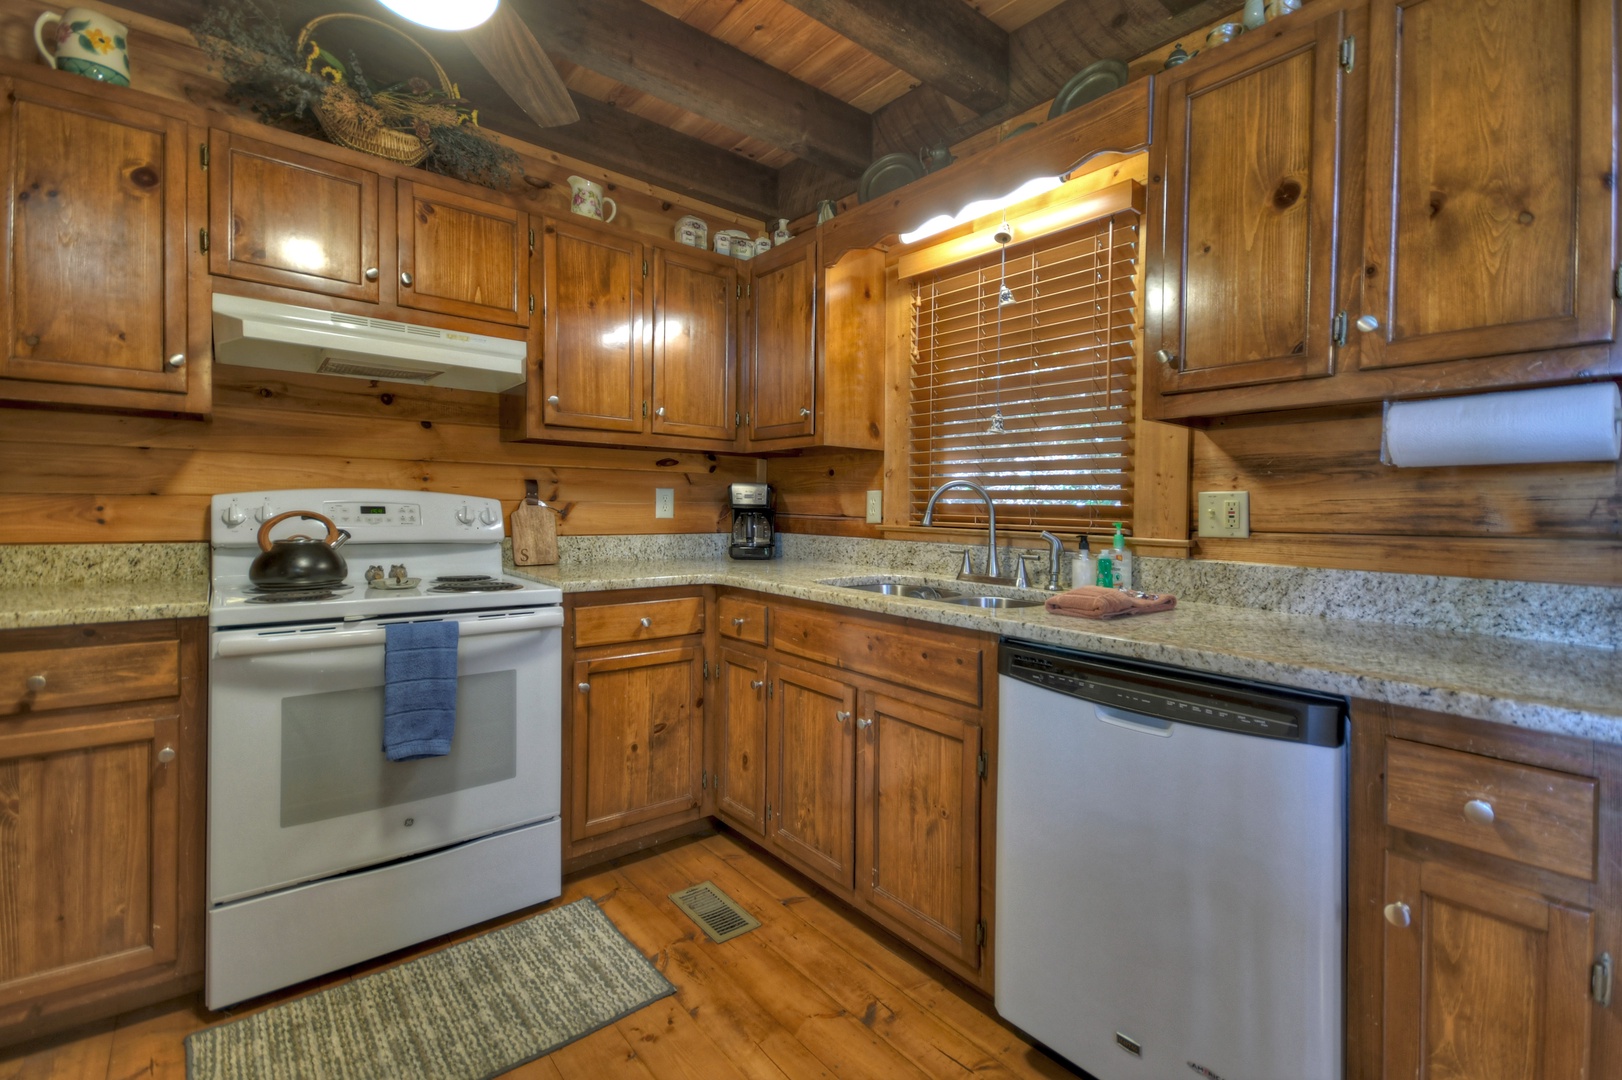 Ridgetop Pointaview- Kitchen area with stove and dishwasher